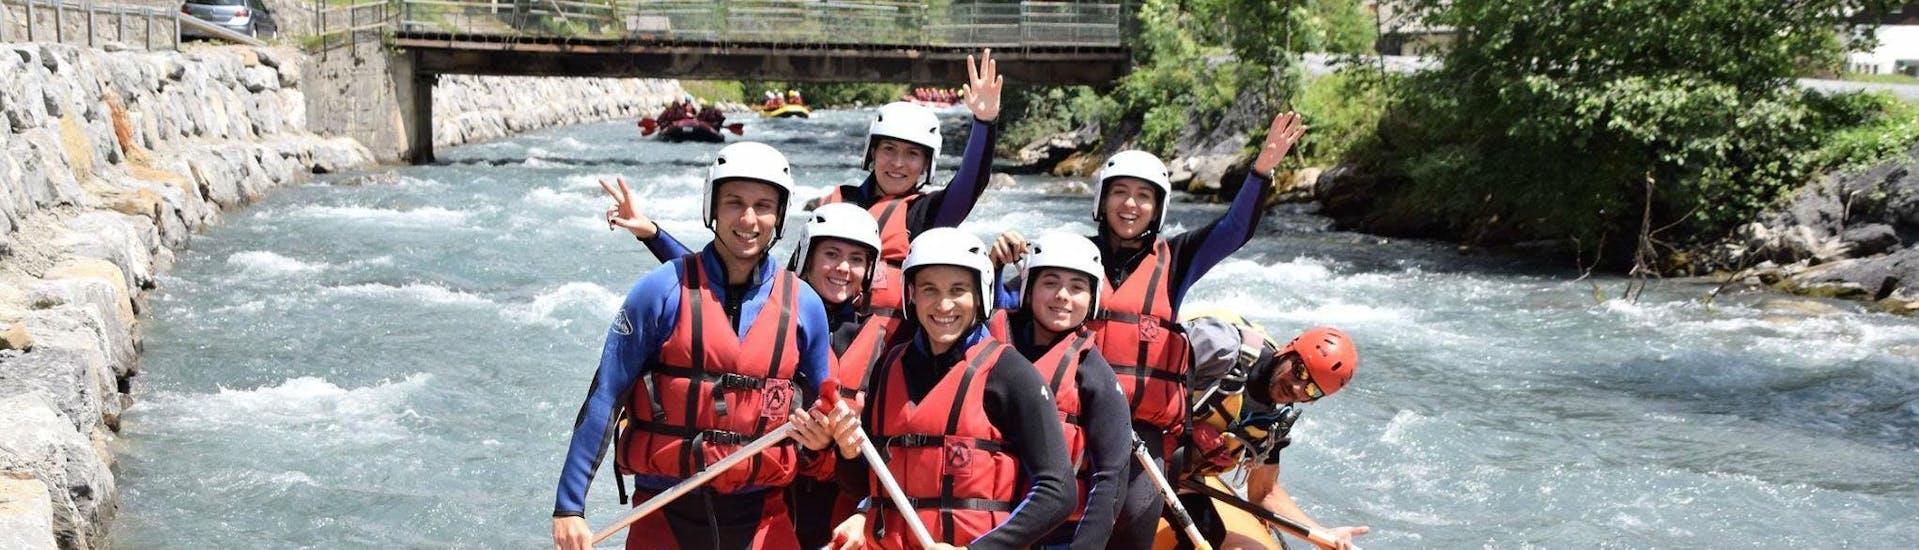 A group of friends is paddling in a beautiful wilderness scenery and having fun during their Rafting on Giffre River - Full Descent with Raft Rider.